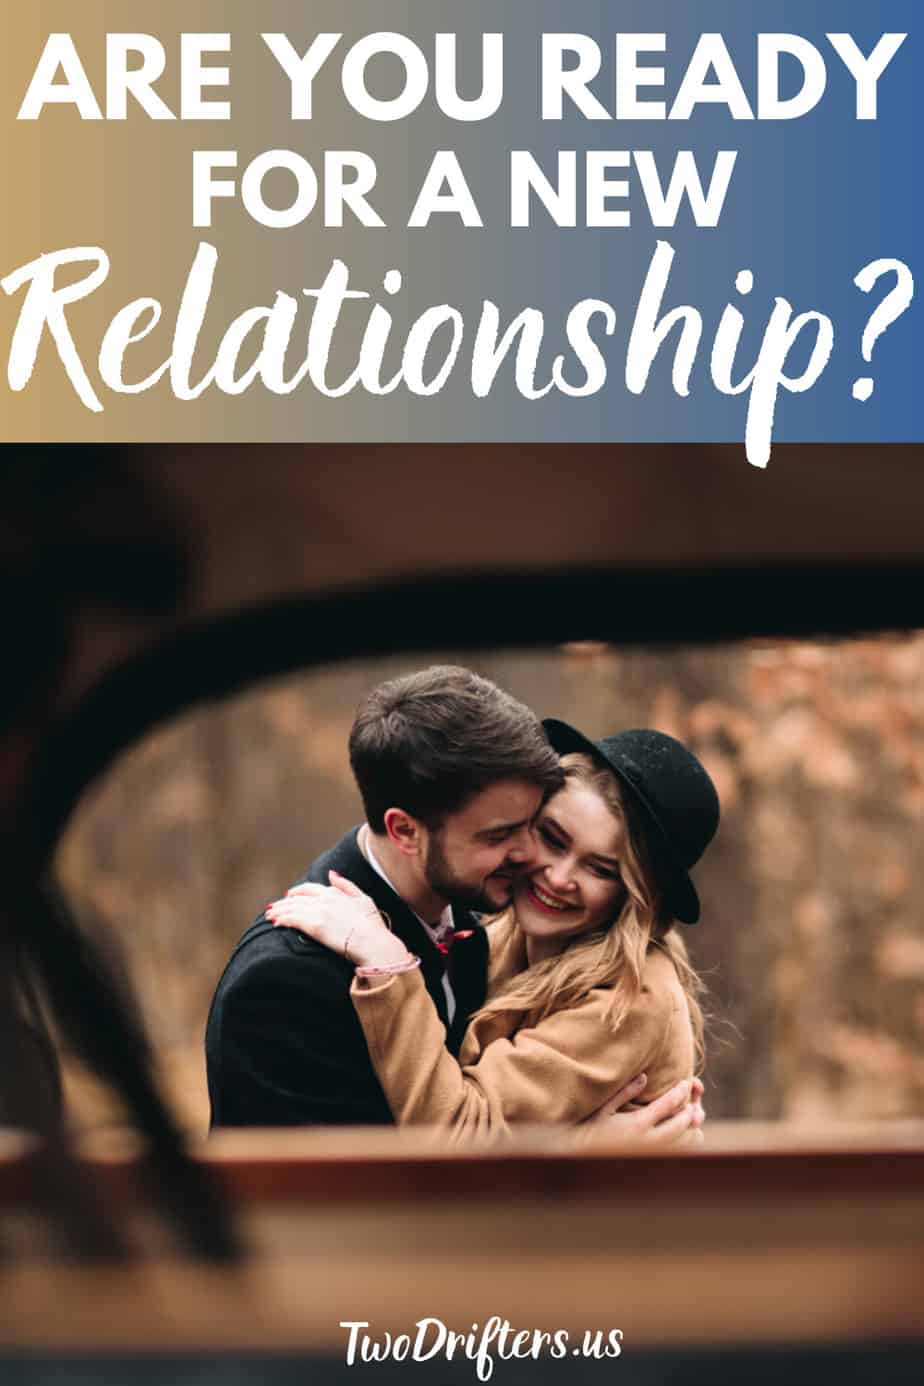 Pinterest social share image that says "Are you ready for a new relationship?"